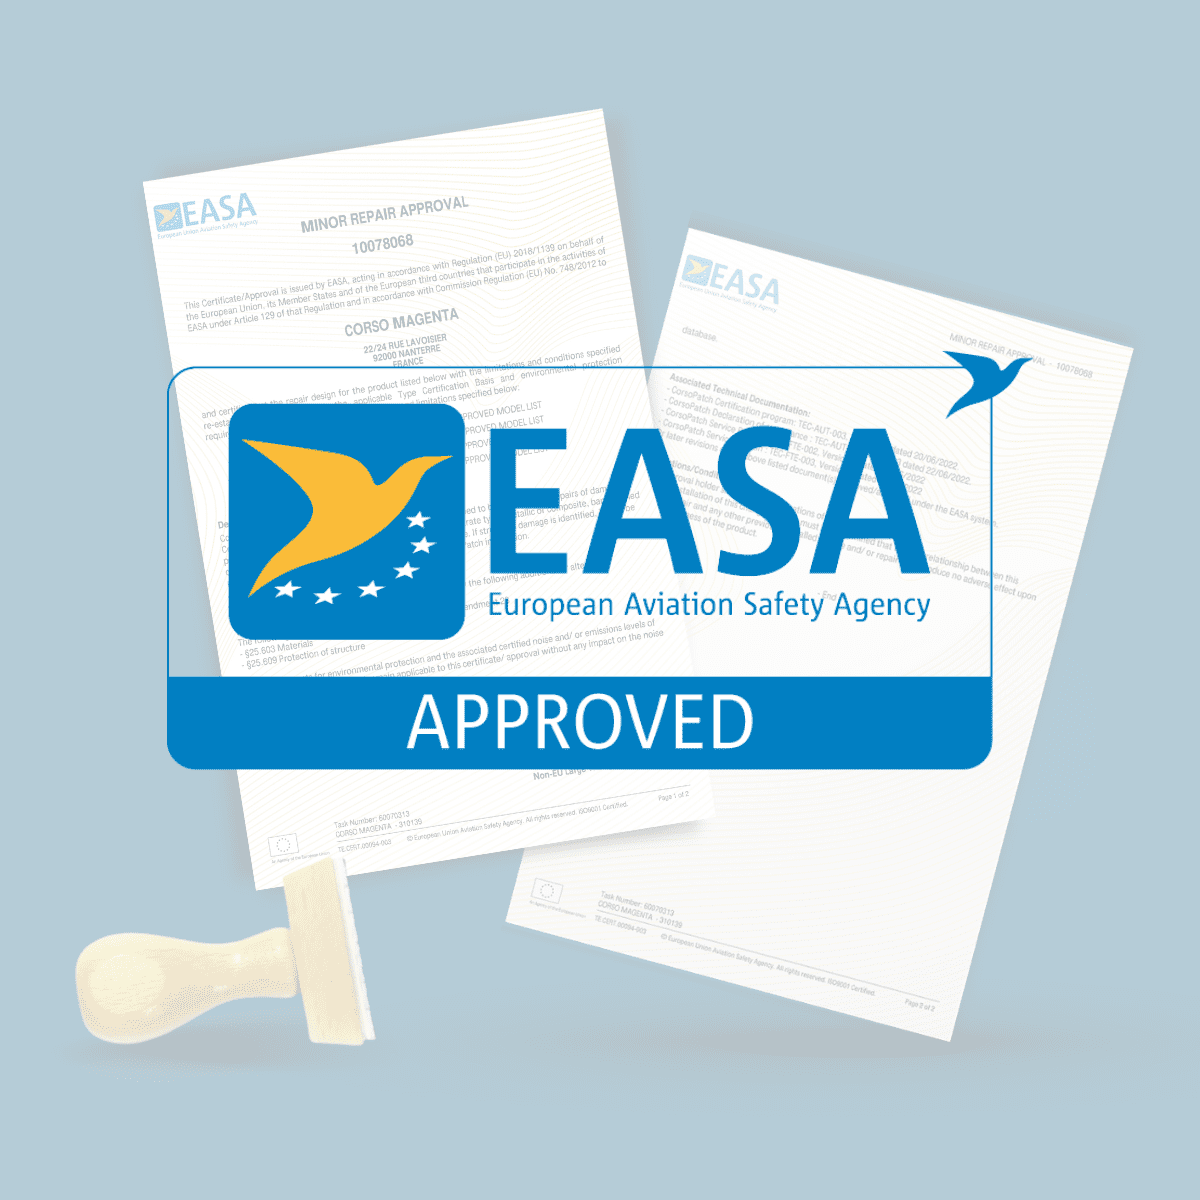 Our fast paint repair solution was just approved by EASA